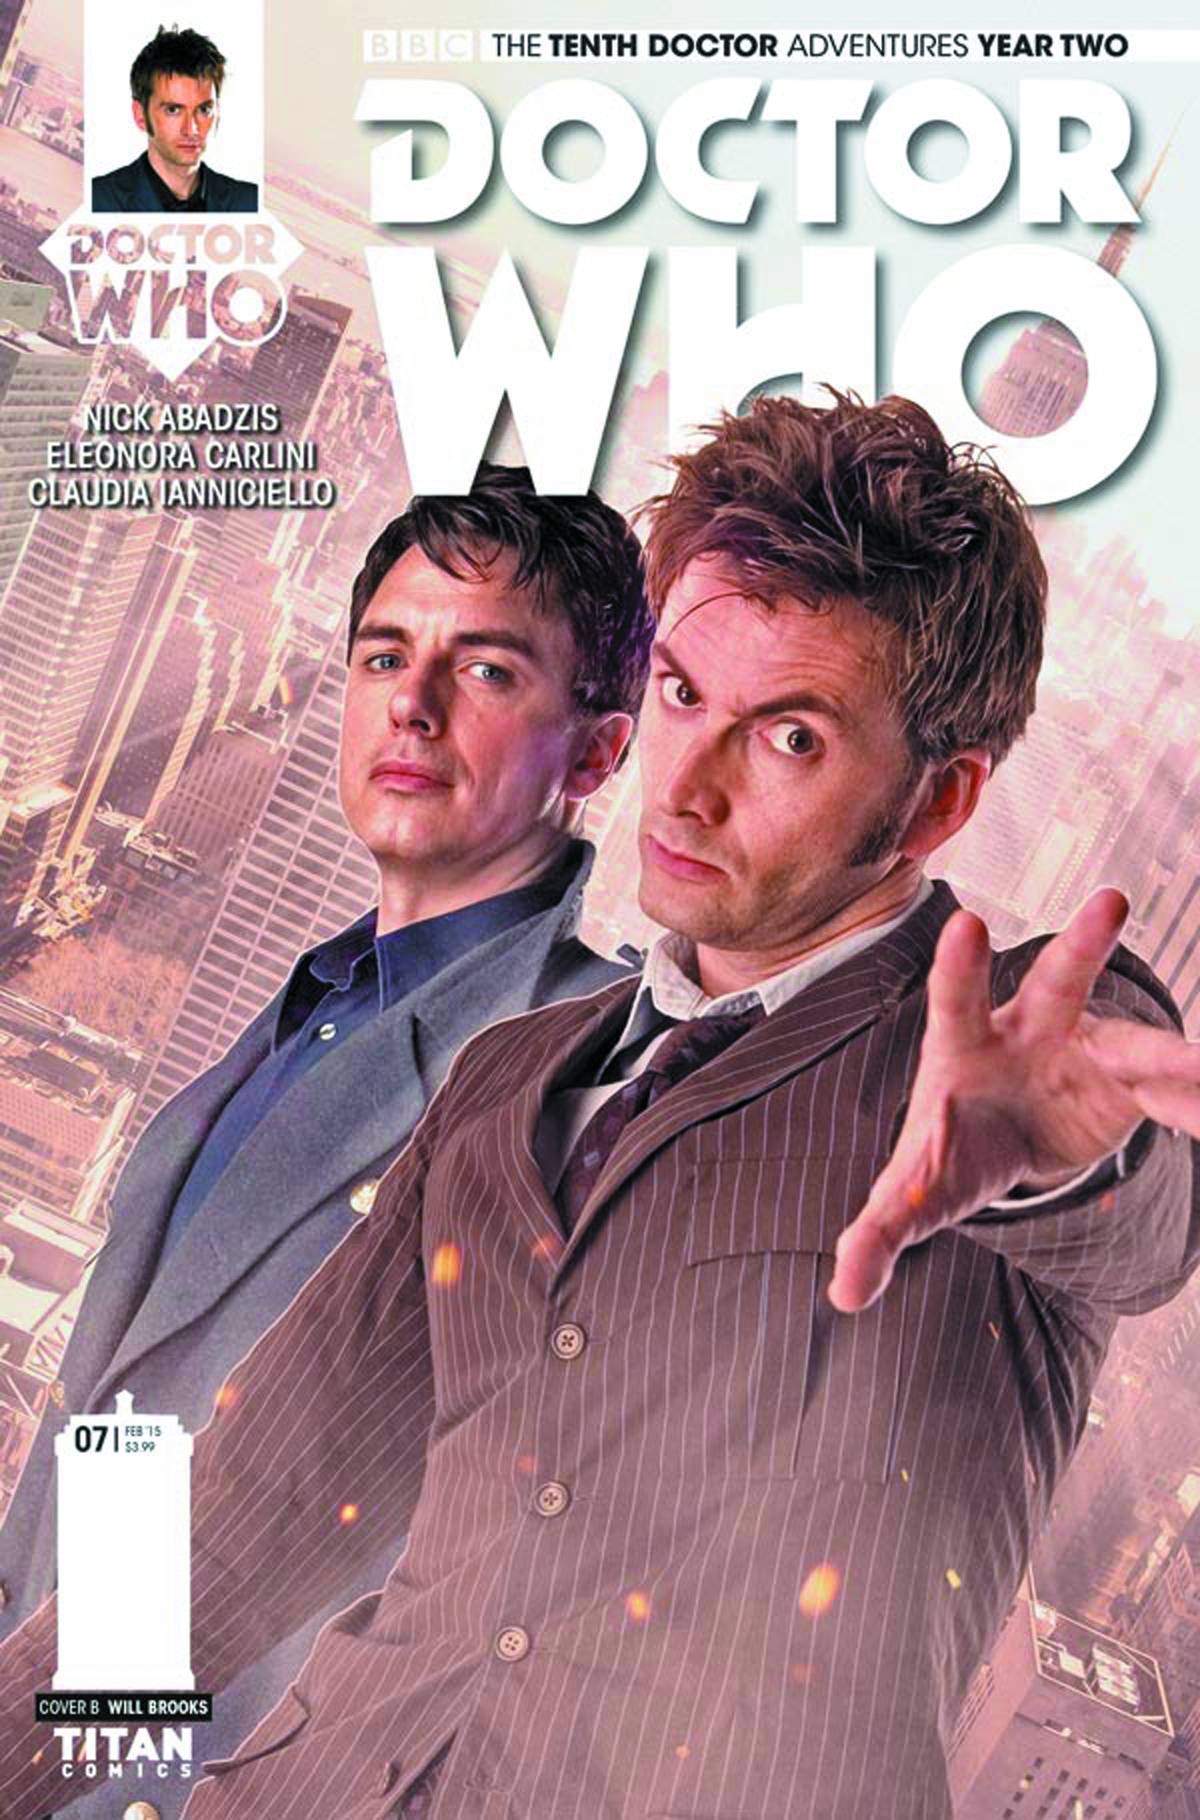 Doctor Who 10th Year Two #7 Cover B Photo